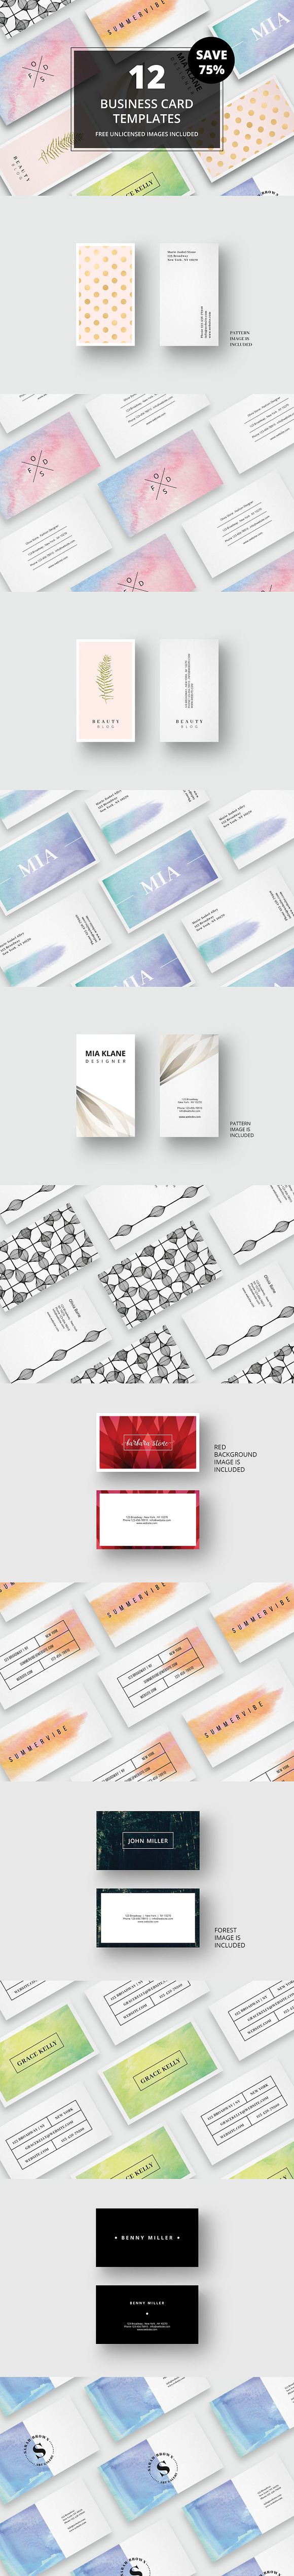 Business card bundle + images No. 2 in Business Card Templates - product preview 12